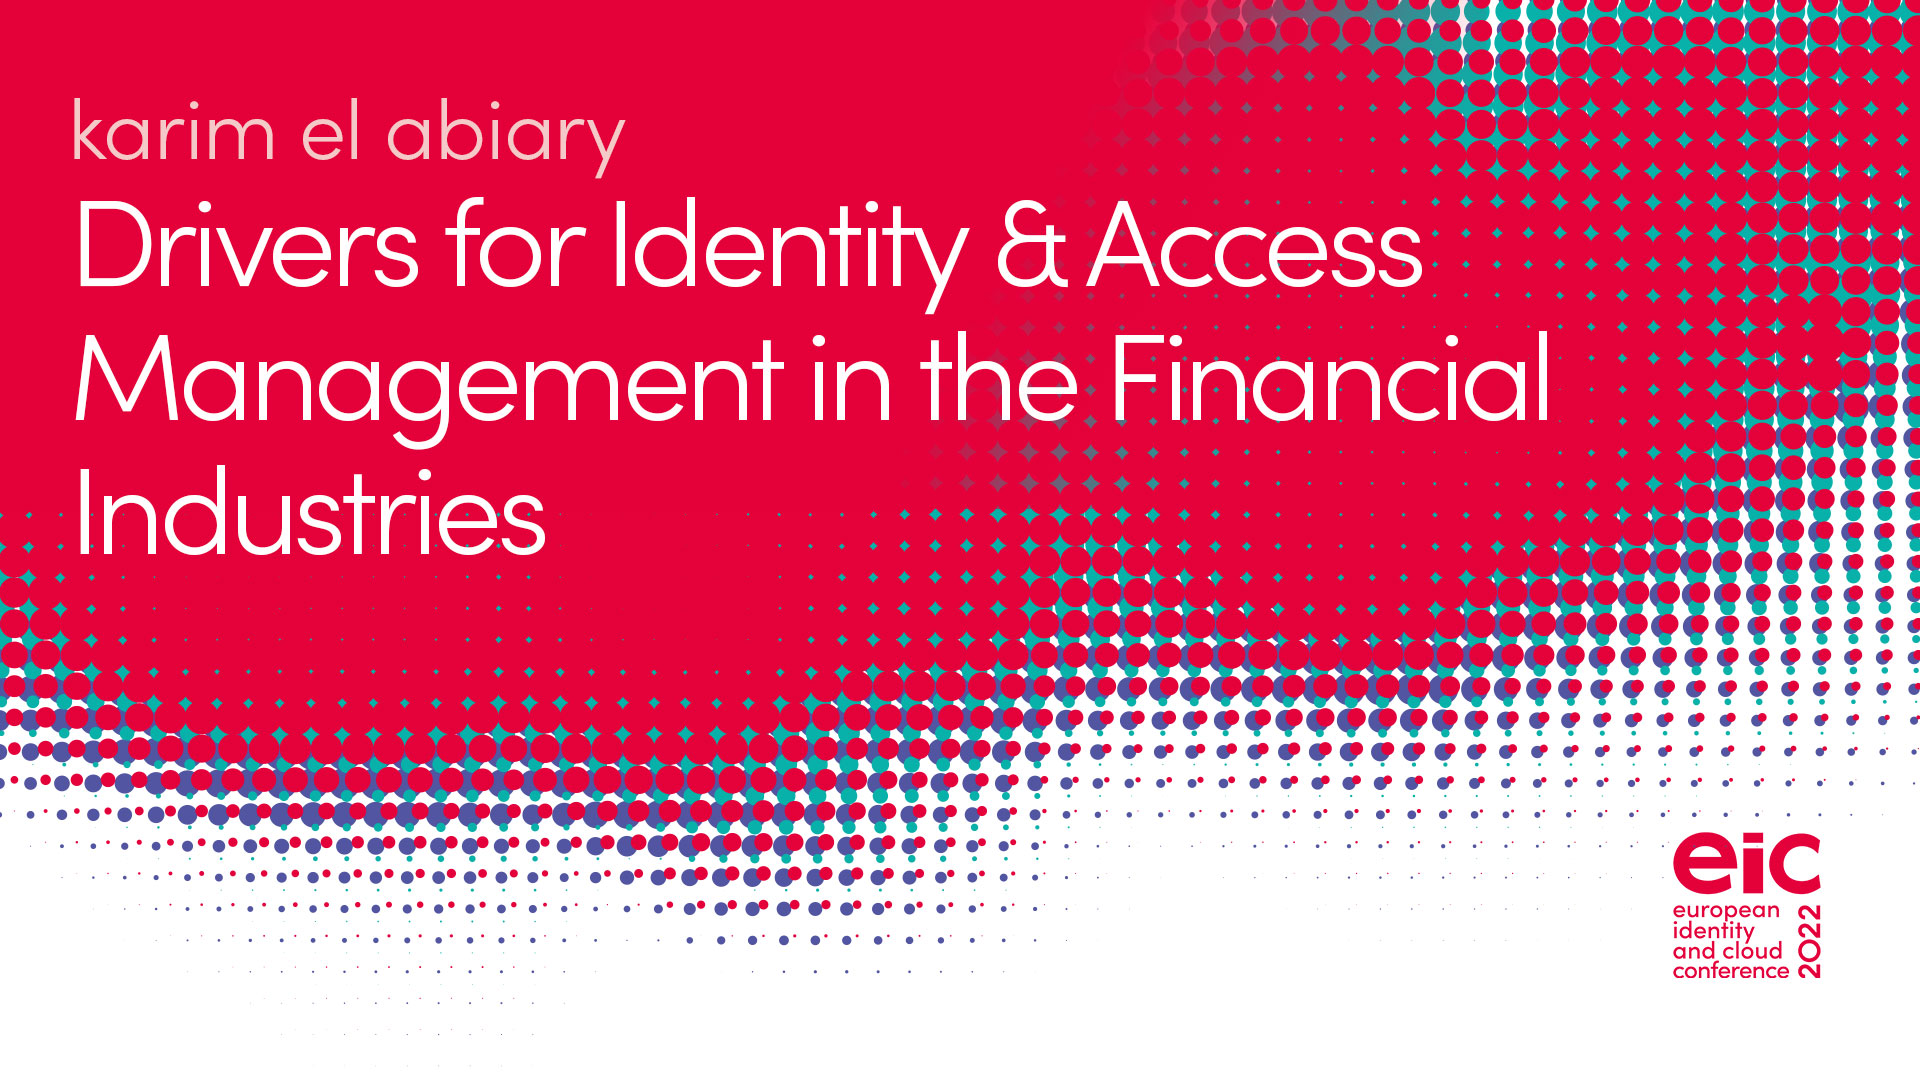 Drivers for Identity & Access Management in the Financial Industries